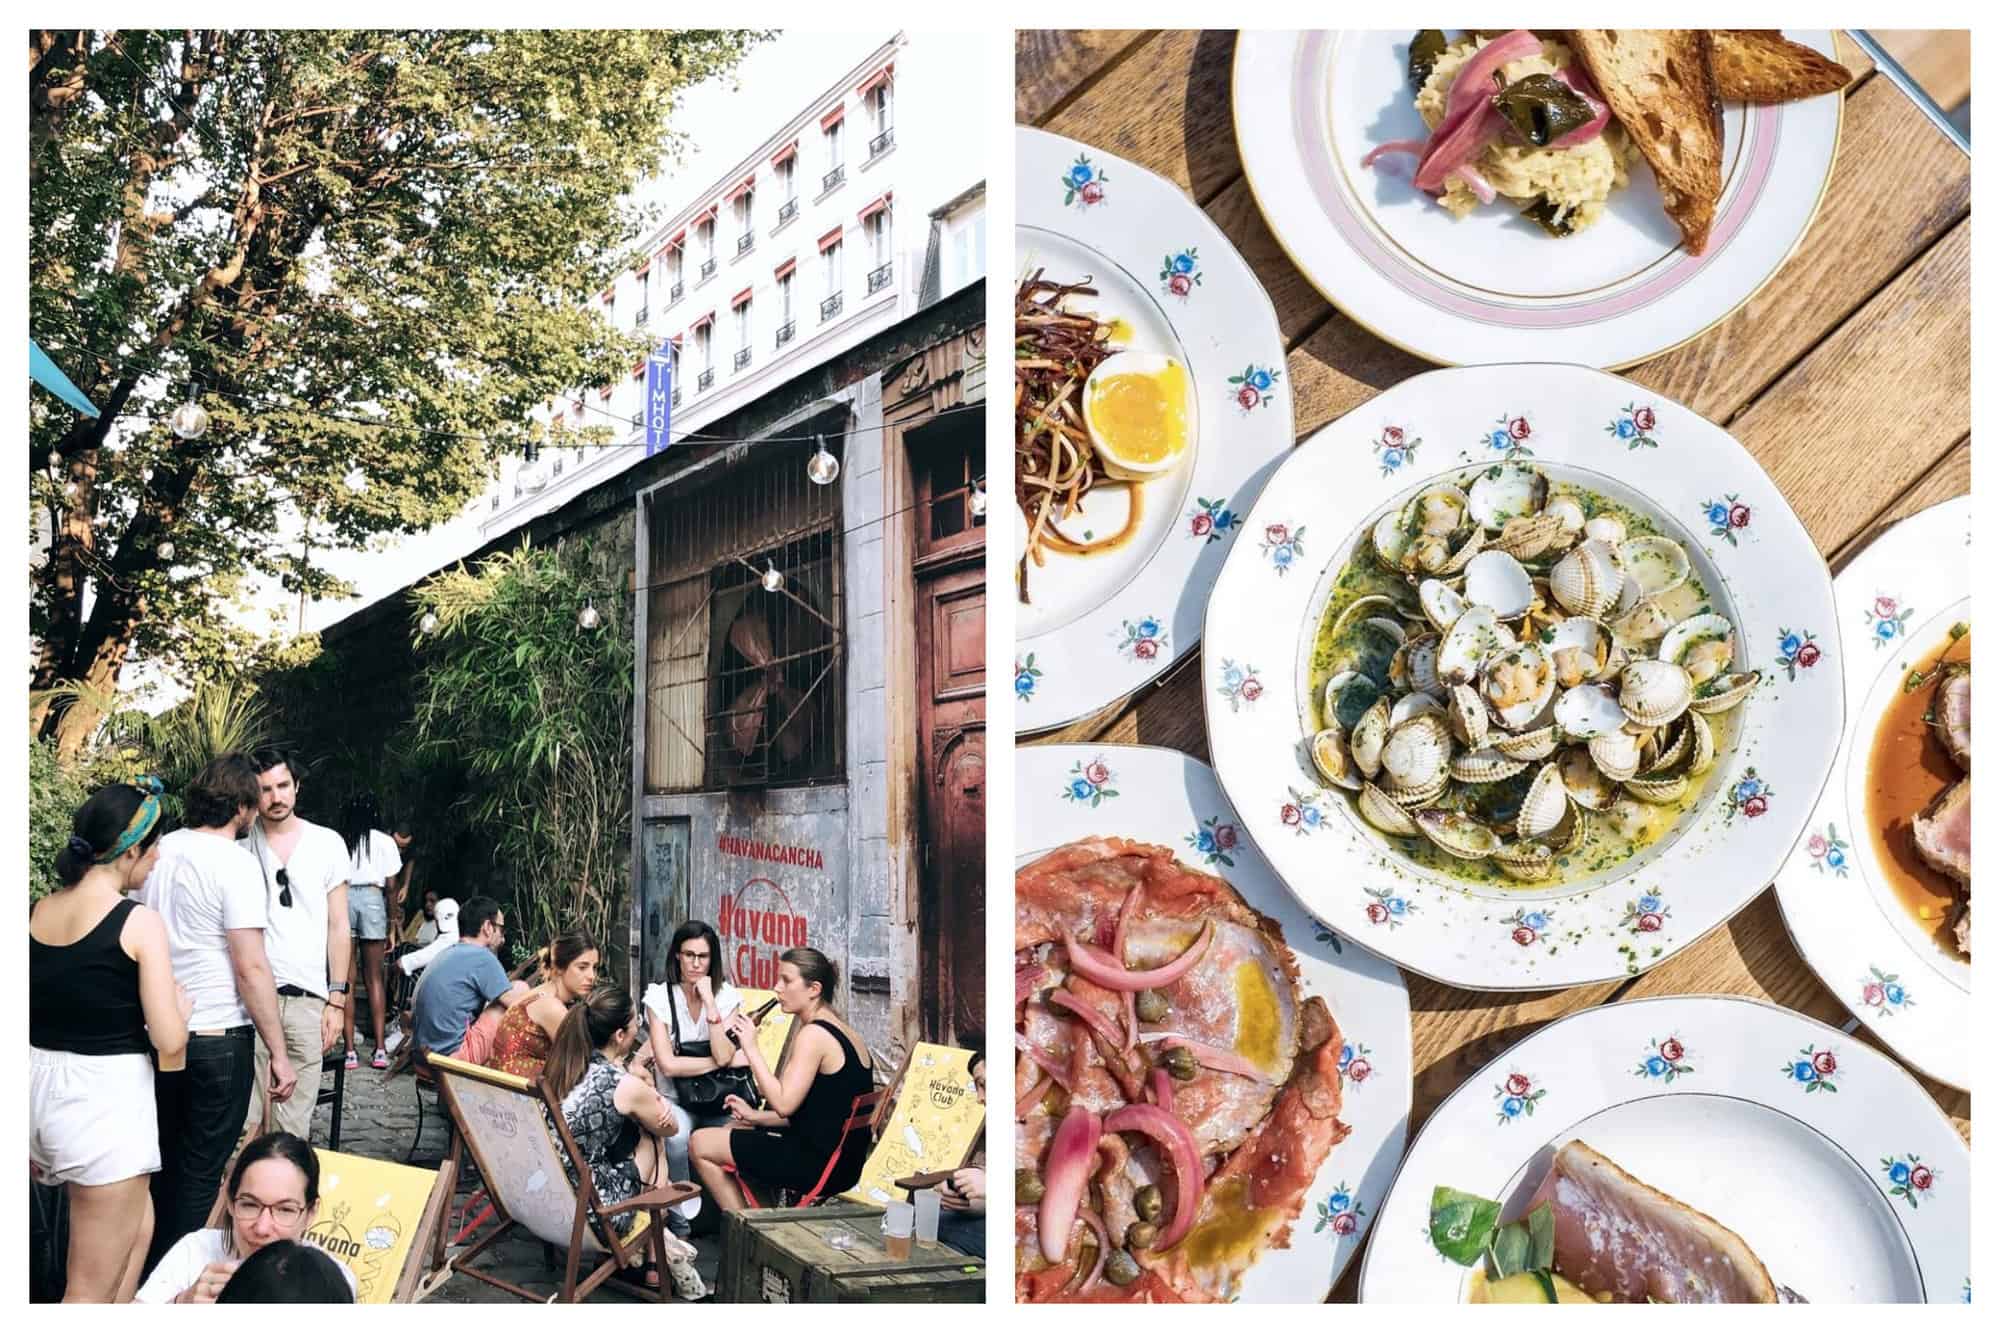 Left: Parisian friends are enjoying their quiet moment in a hidden terrace in Paris called Café A. Right: A plate of different seafood meals you can order from Maison Maison.